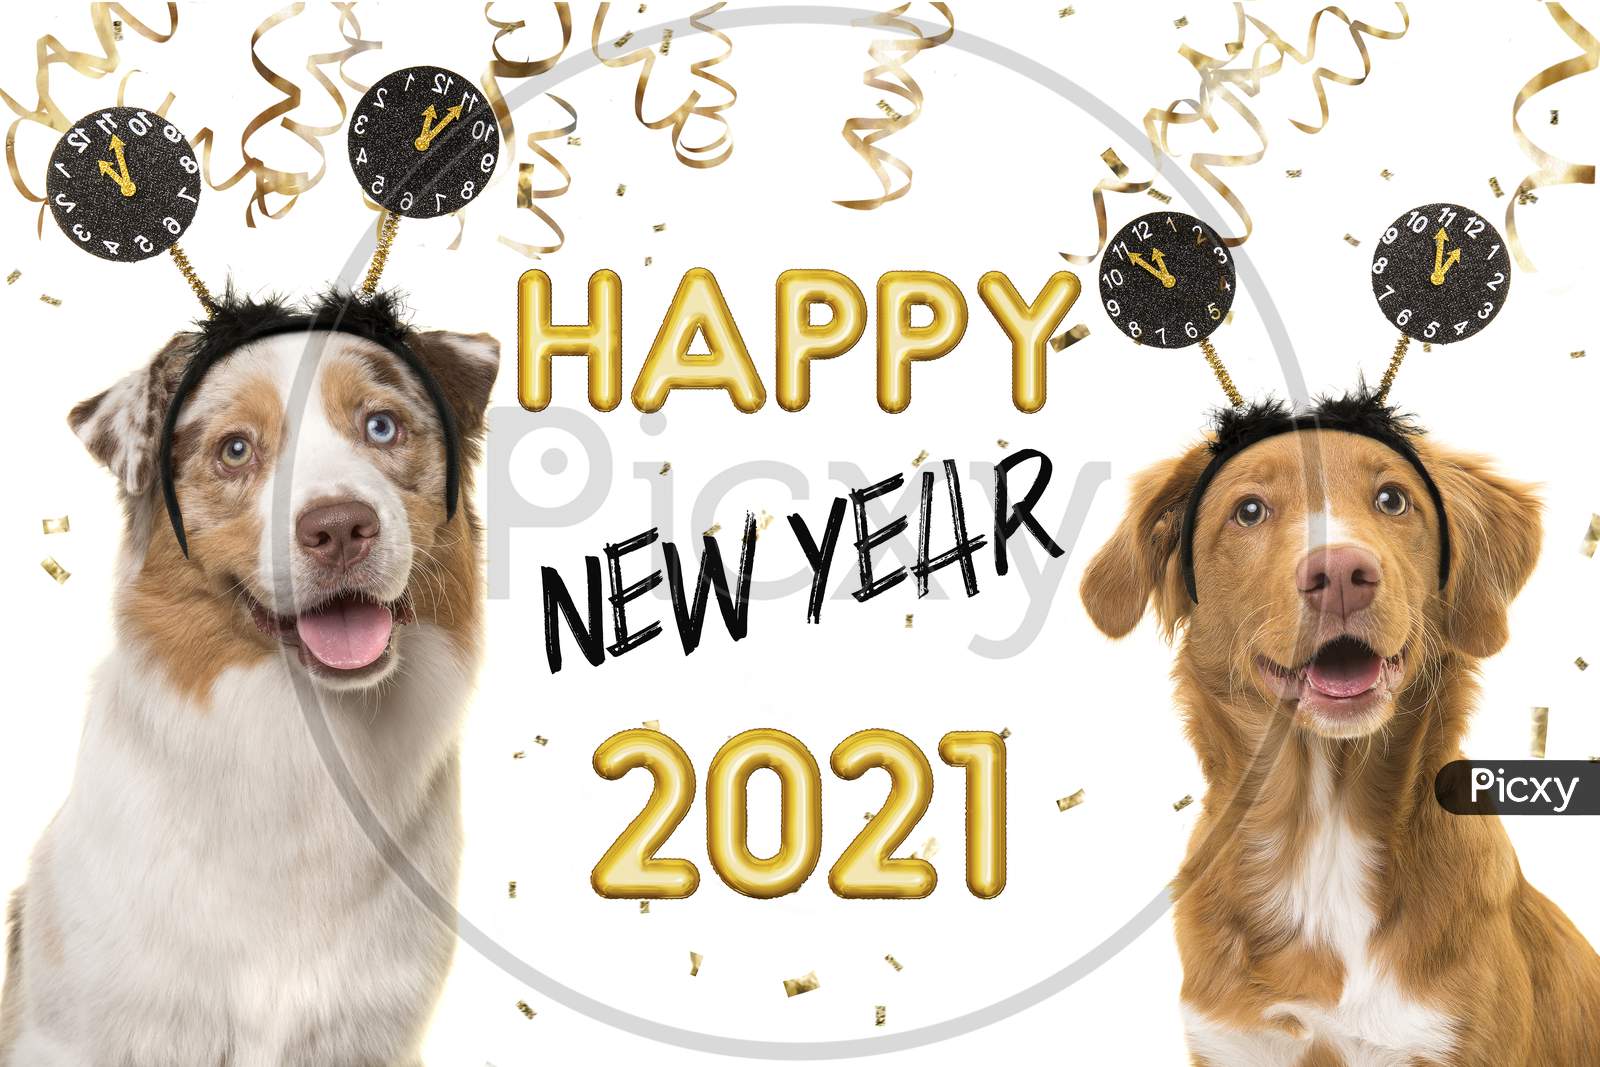 Portrait Of Two Happy Dogs Wearing A New Year Diadem On A White Background With Golden Party Garlands And Text Happy New Year 2021